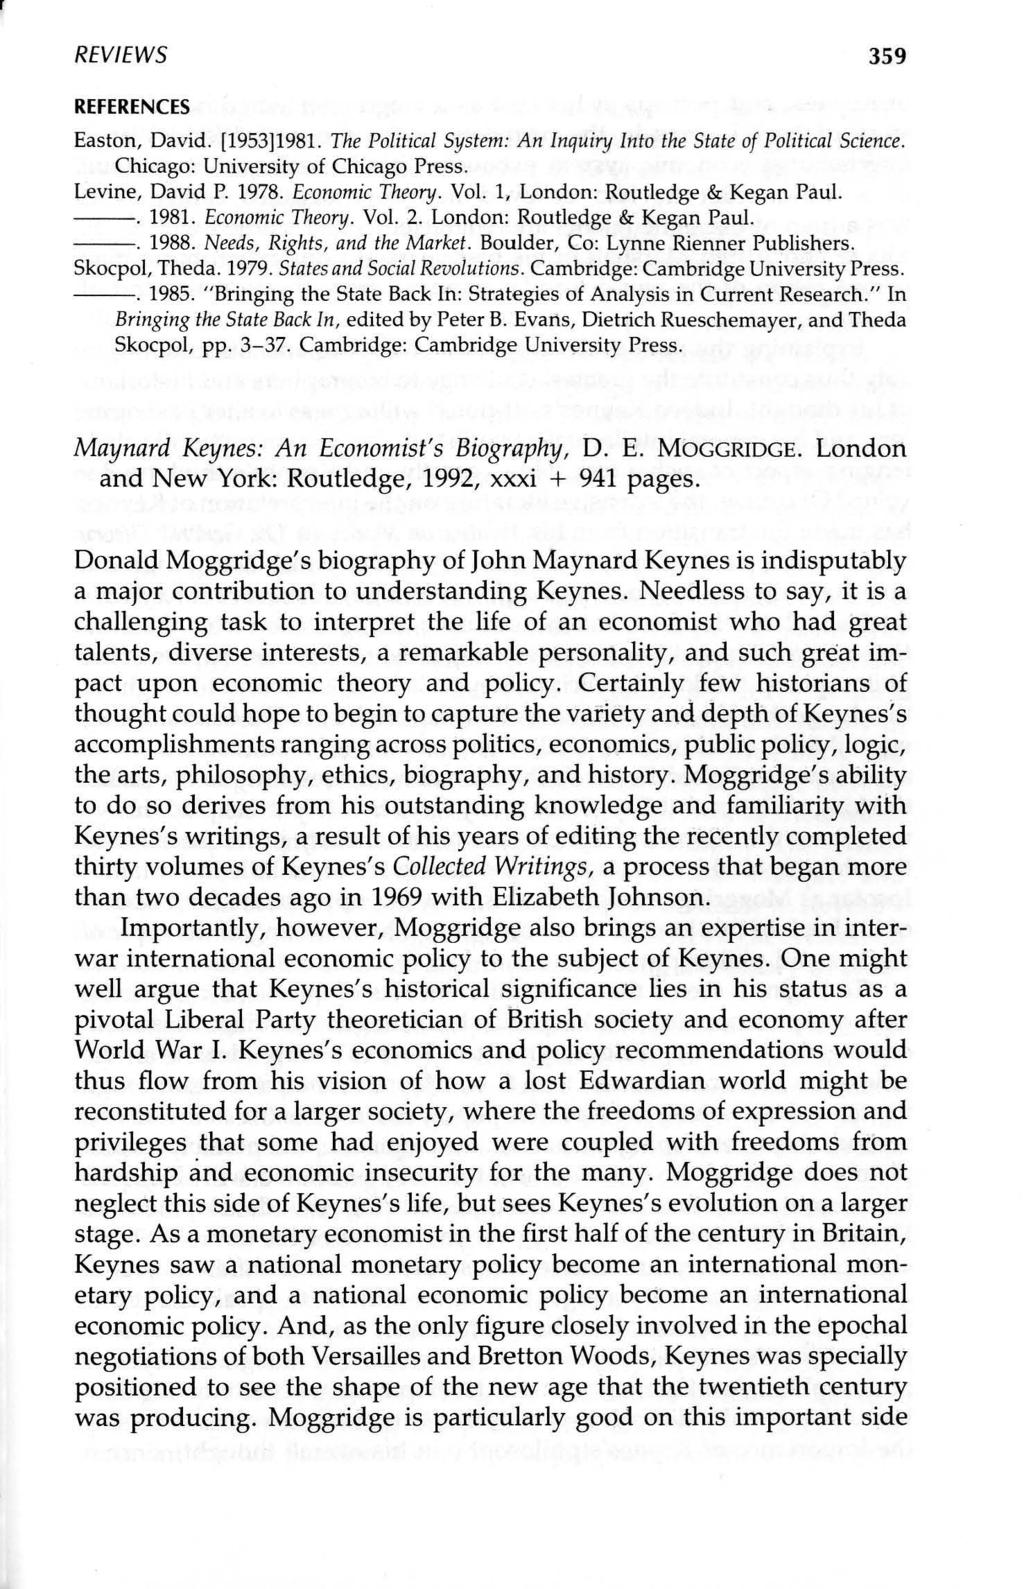 REVIEWS 359 REFERENCES Easton, David. [1953J1981. The Political System: An Inquiry Into the State of Political Science. Chicago: University of Chicago Press. Levine, David P. 1978. Economic Theory.